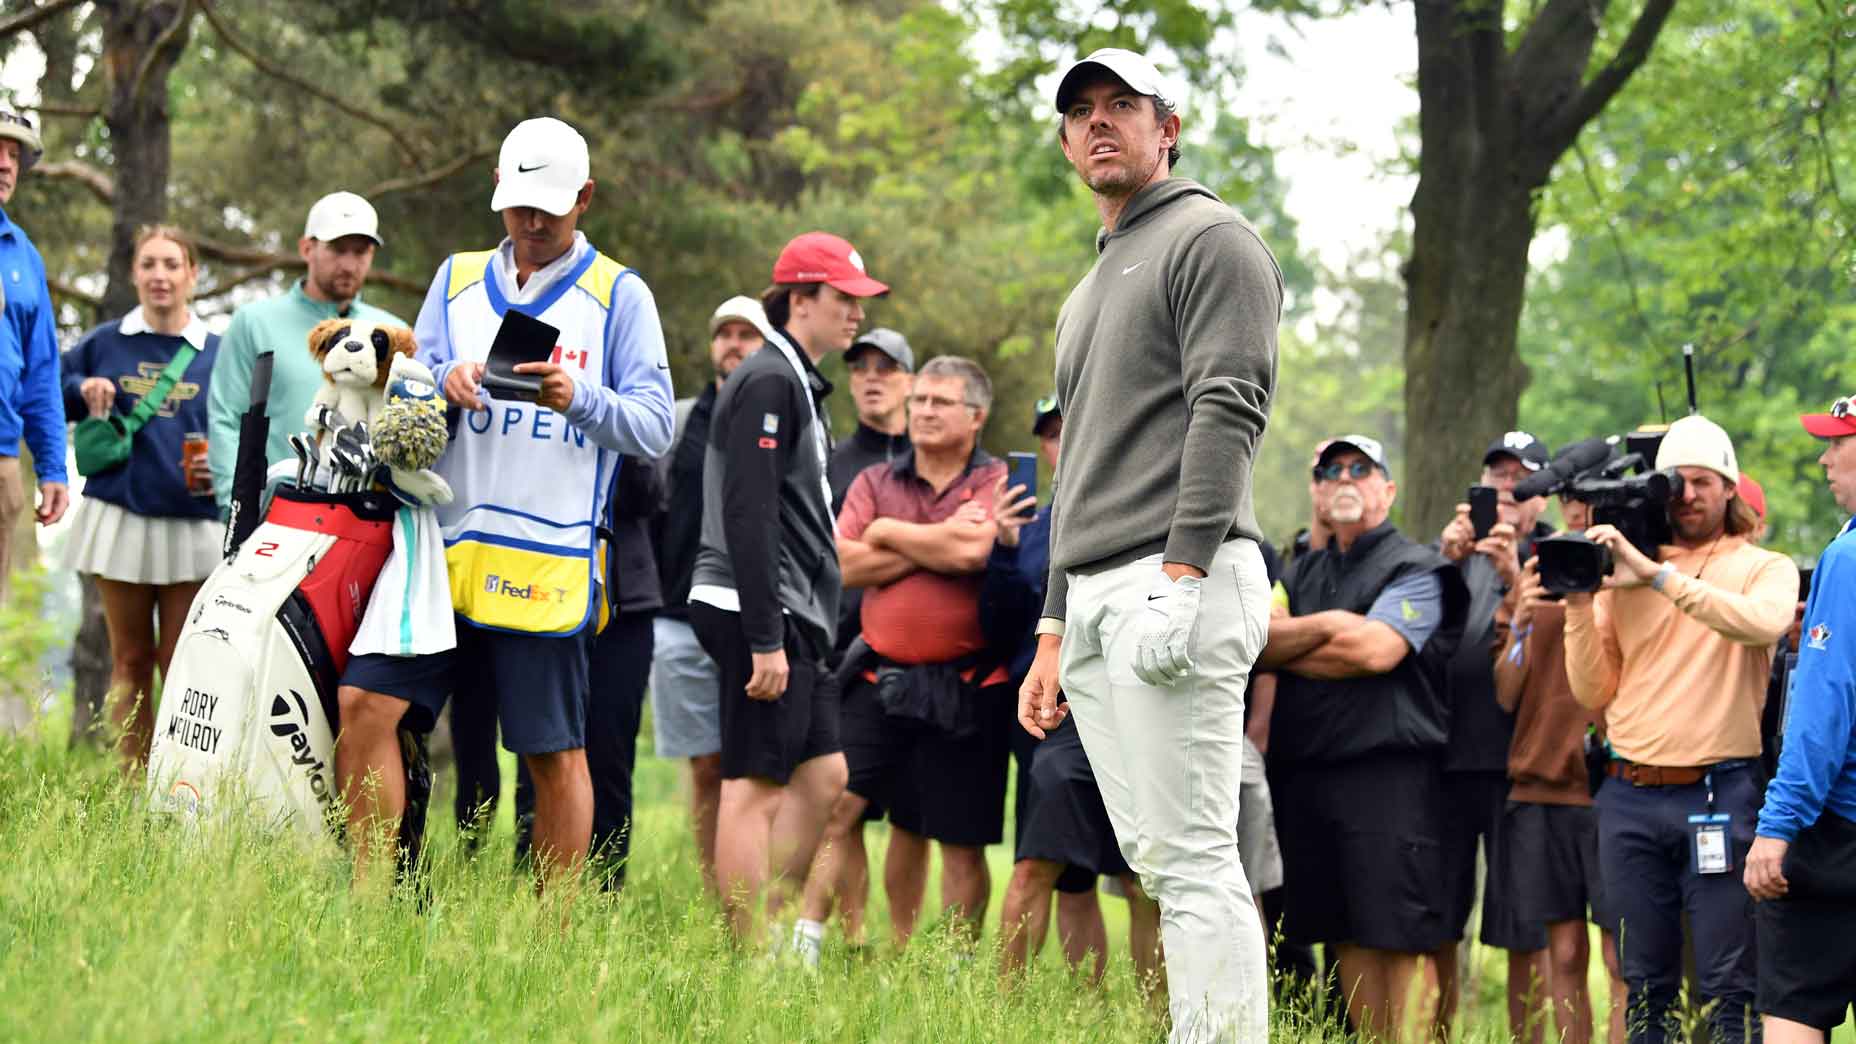 golf.com - Nick Piastowski - The new normal on the PGA Tour? Focusing on golf amid the unknowns